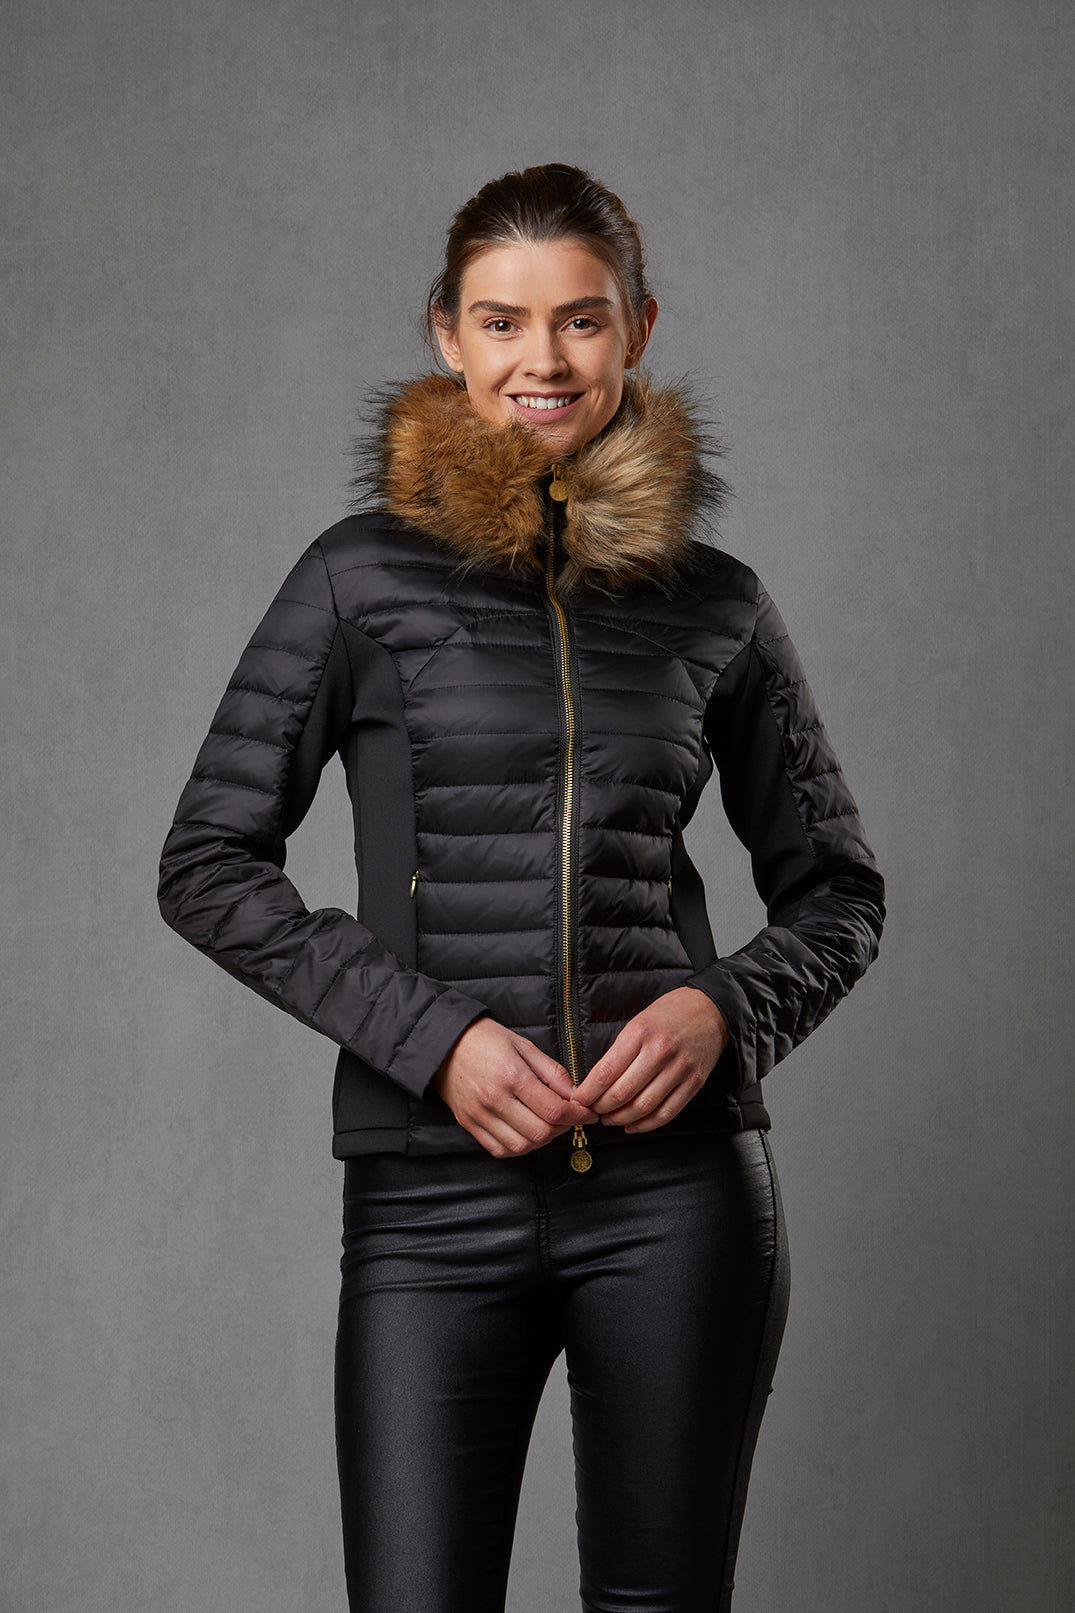 Model wearing a women's down padded jacket in black with stretch sides. The jacket has a detachable faux fur collar and branded gold zip.